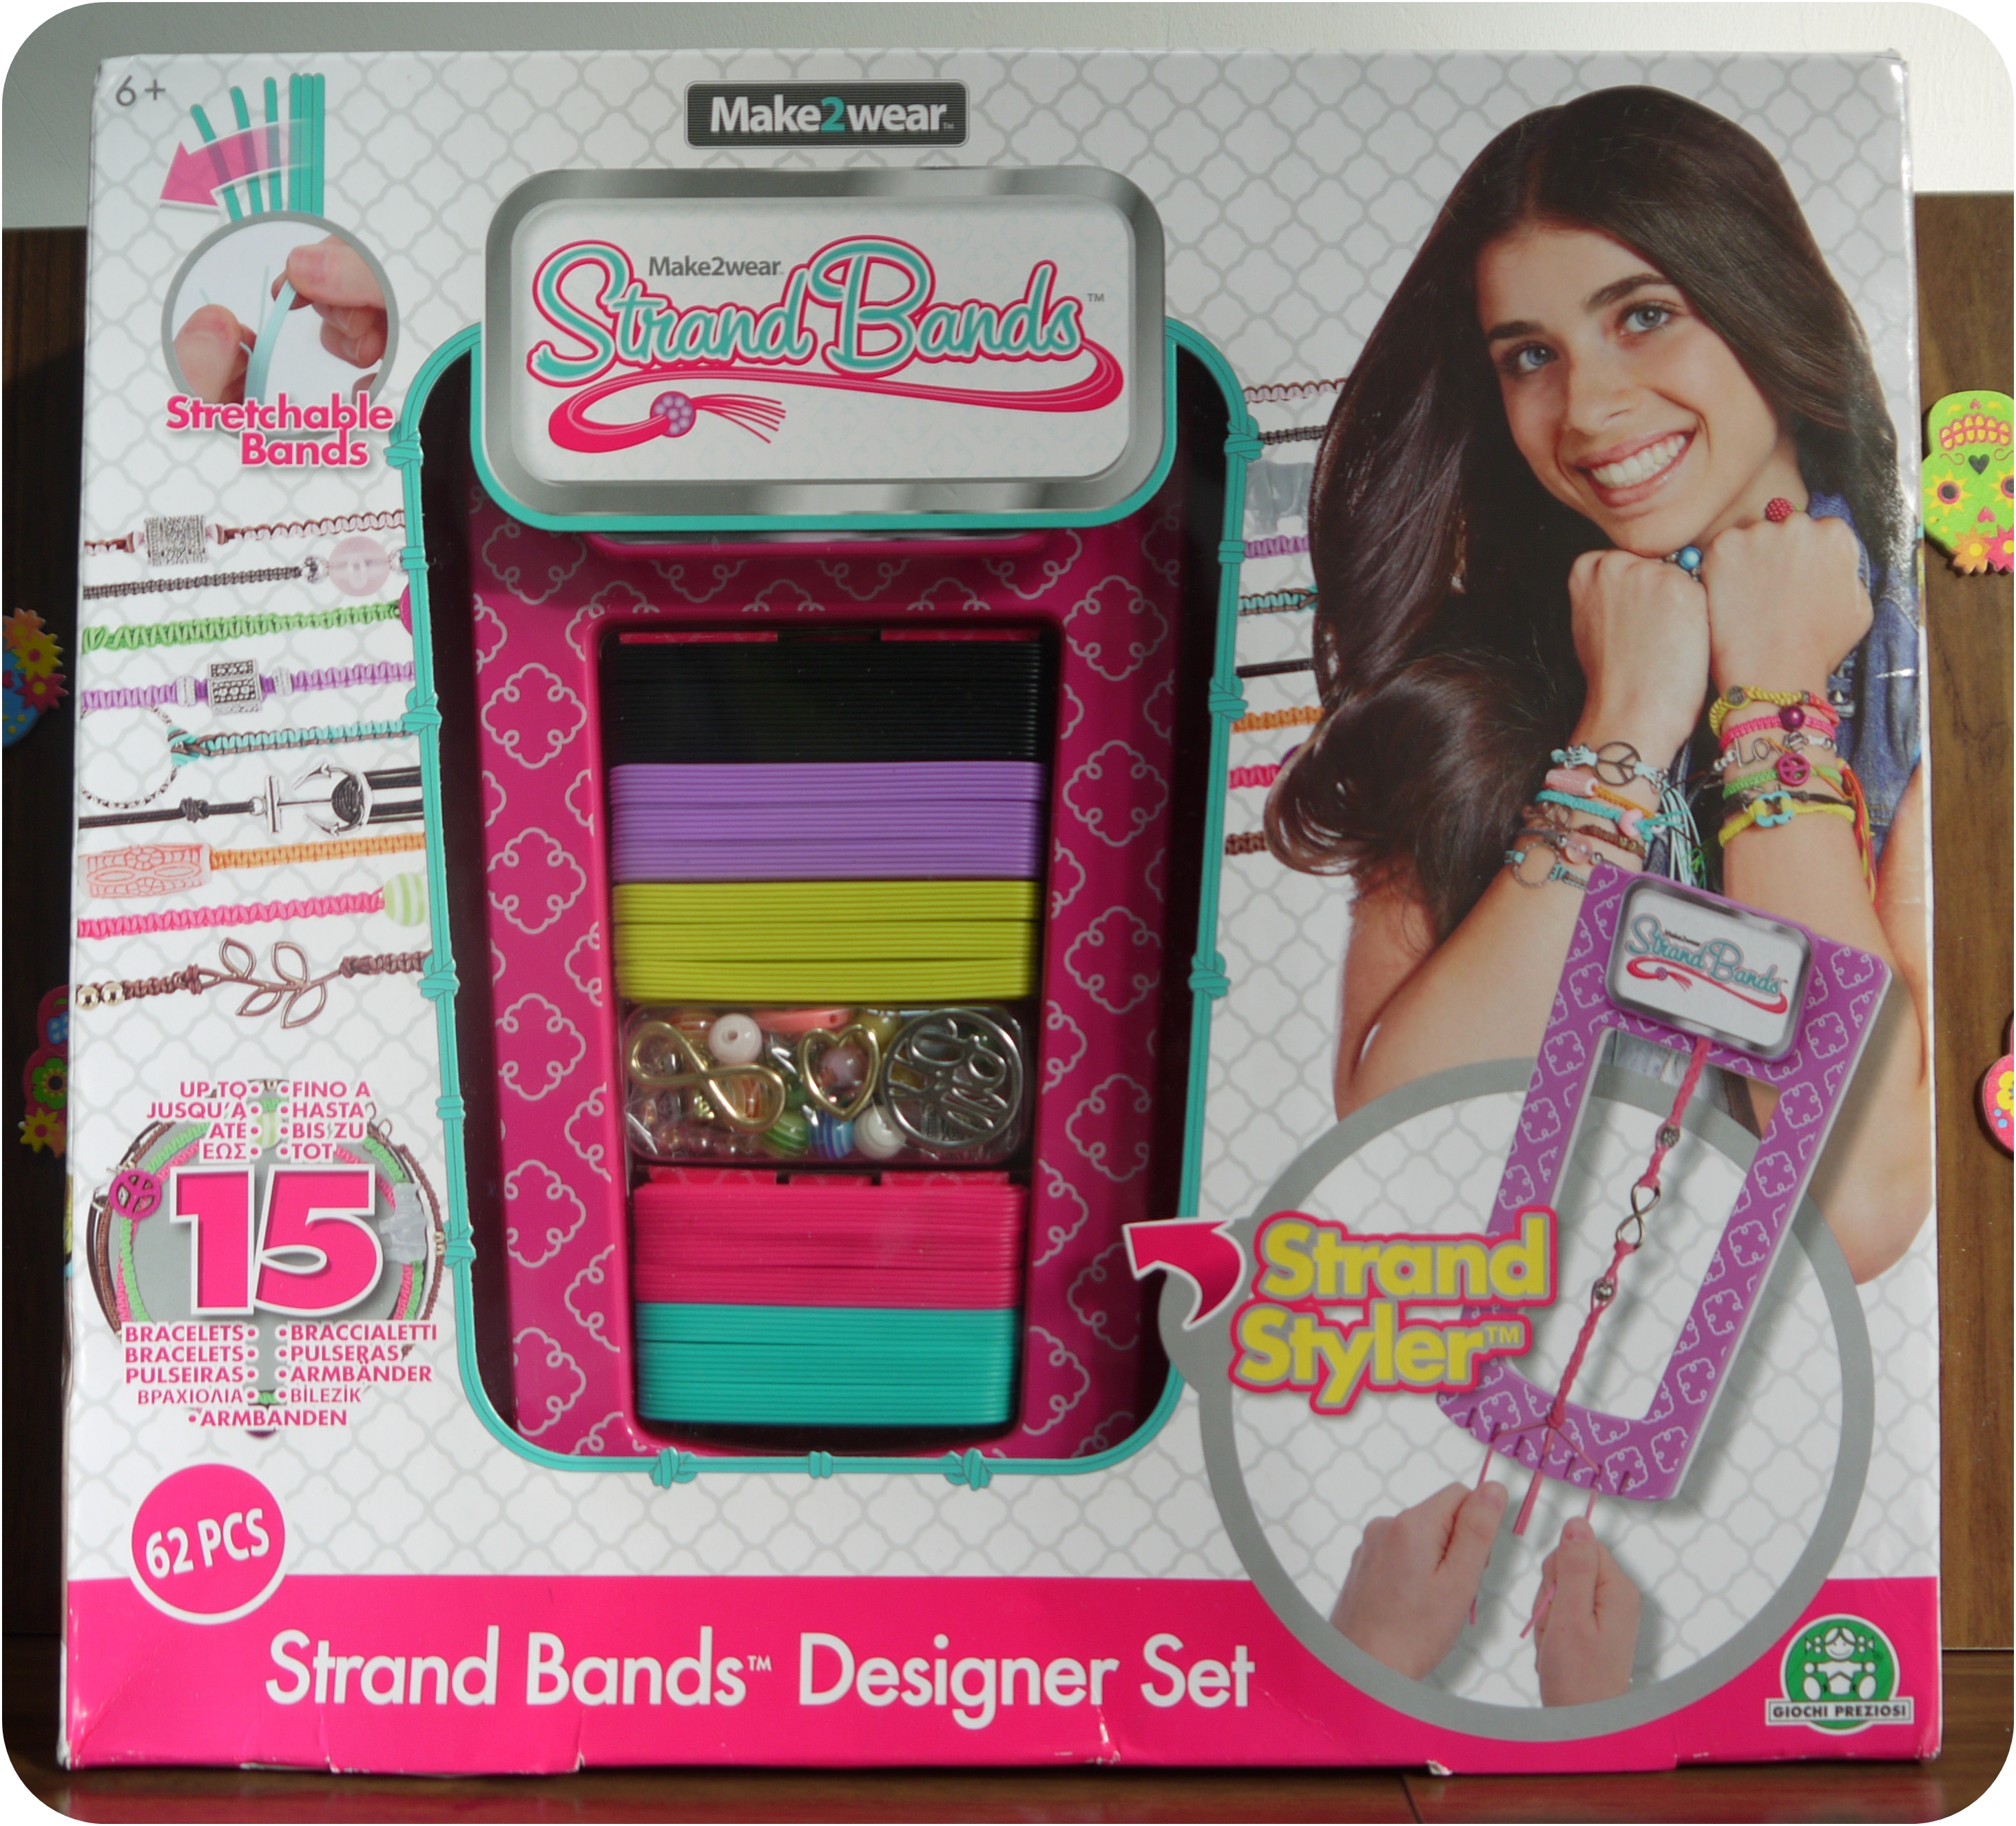 Strand Bands Designer Kit from Flair Plc – Girls Arts and Crafts – Review